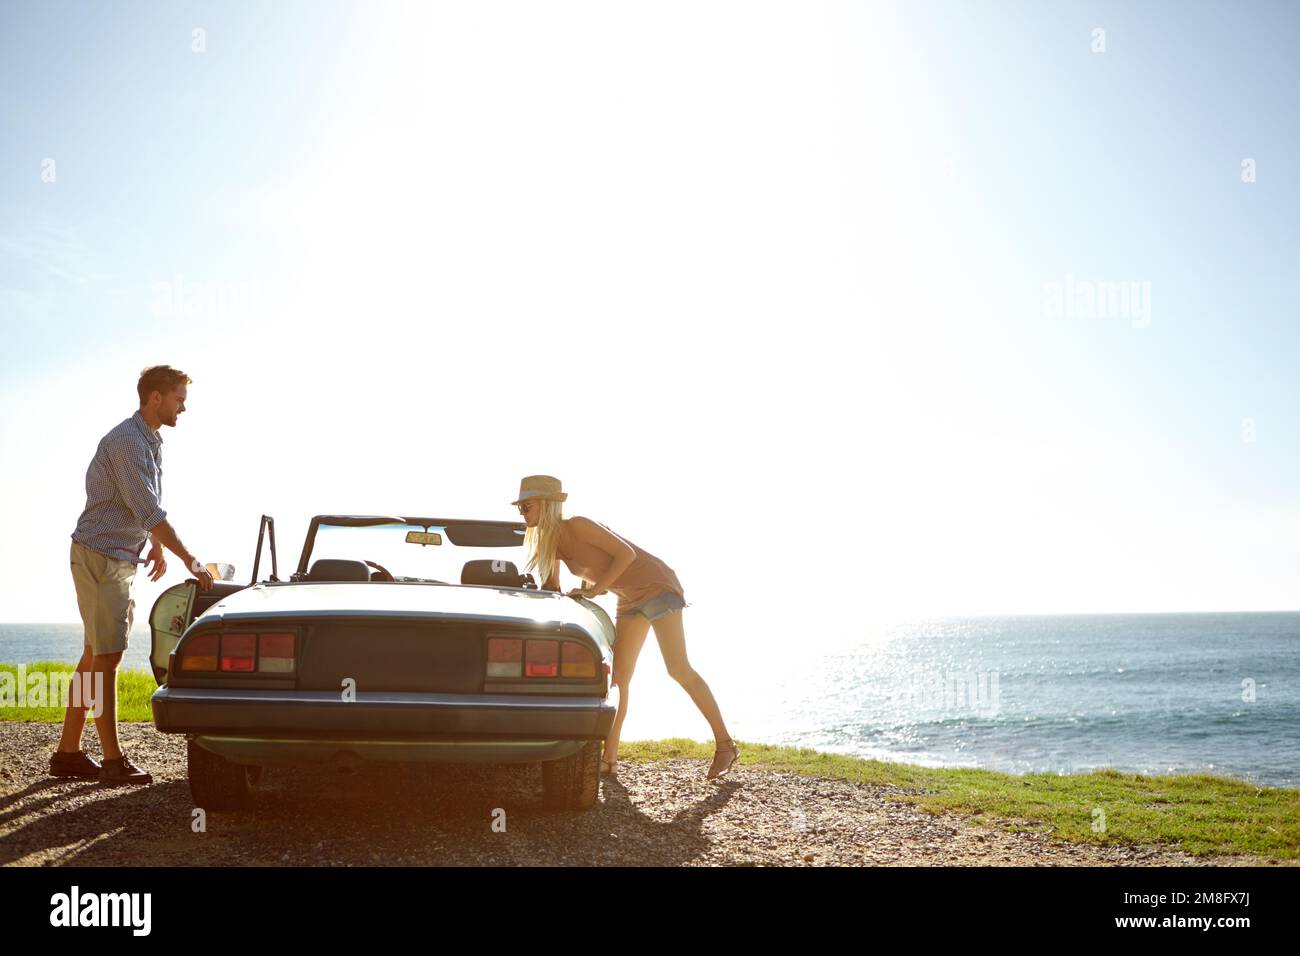 Car road trip, travel and couple on ocean sea adventure, holiday transport journey or summer vacation bond. Love flare mockup, convertible vehicle and Stock Photo